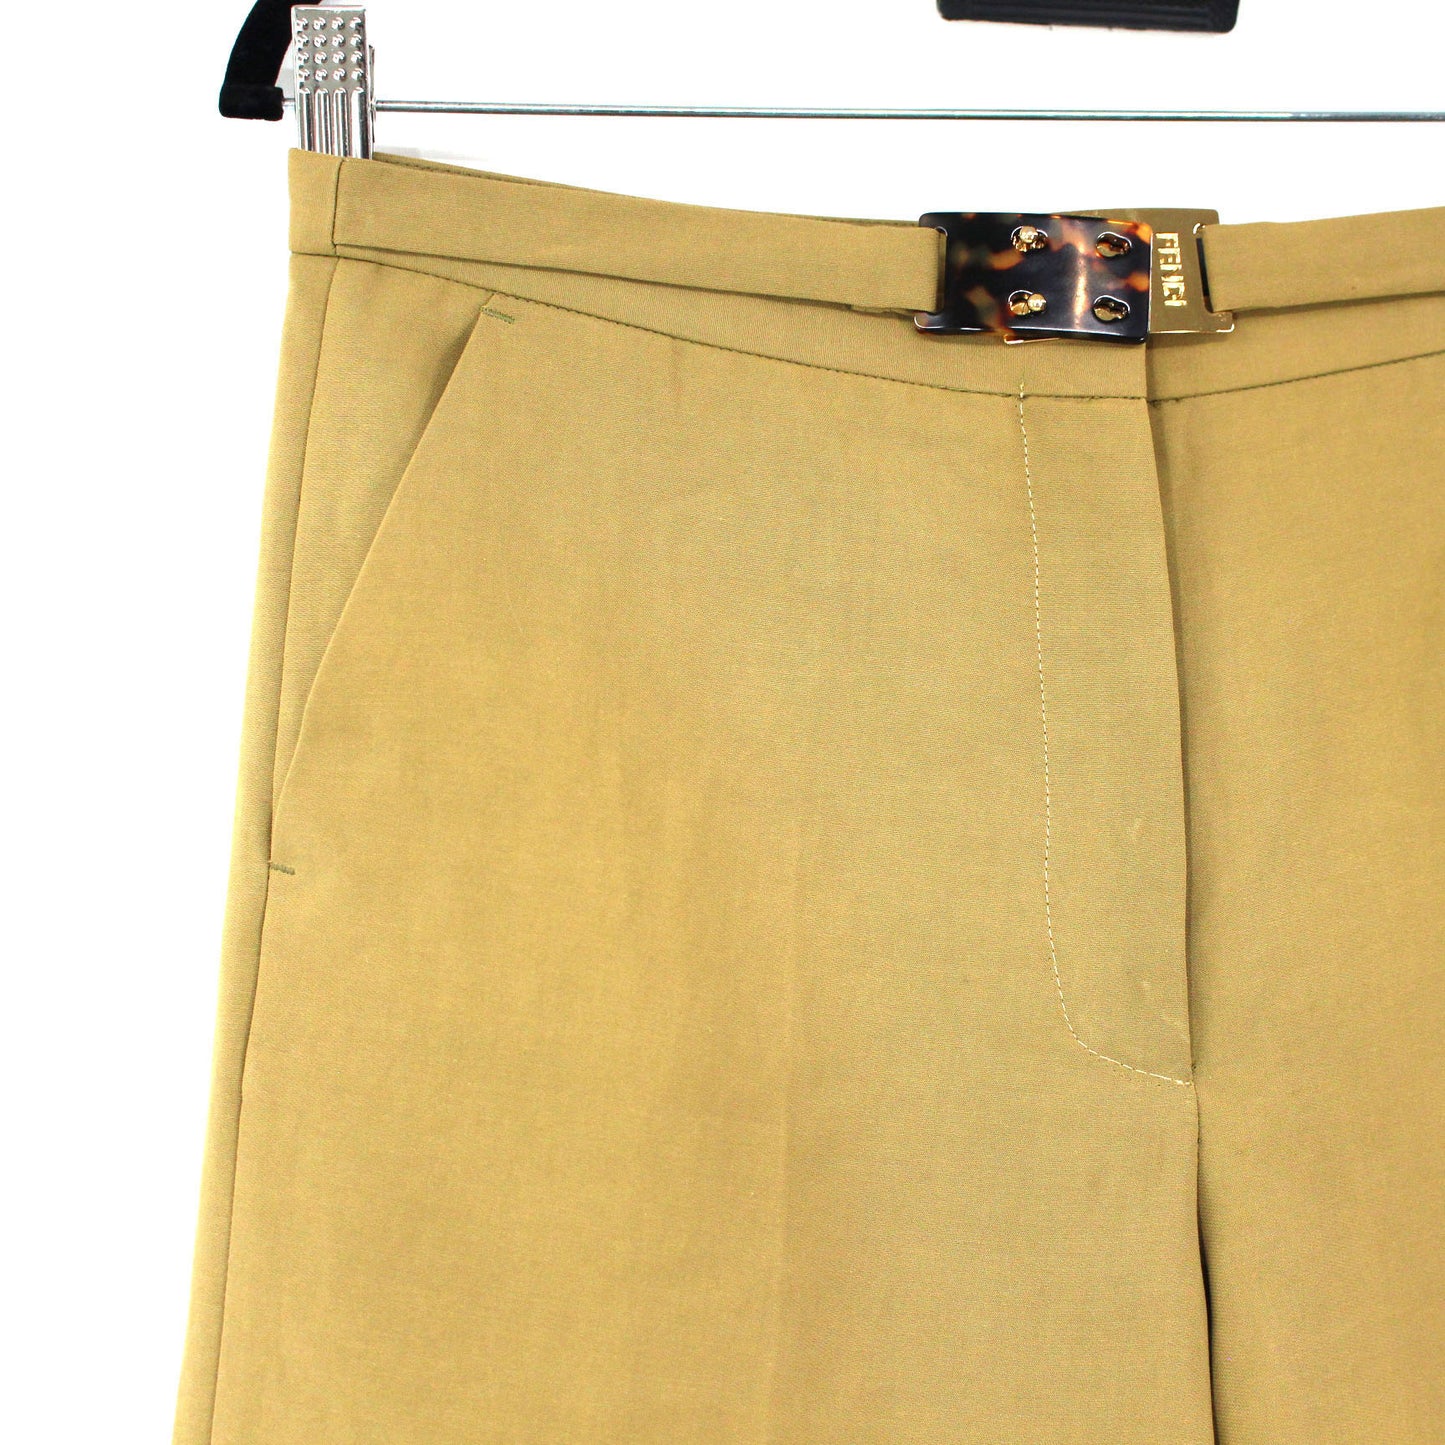 Fendi Belted Crepe Trousers